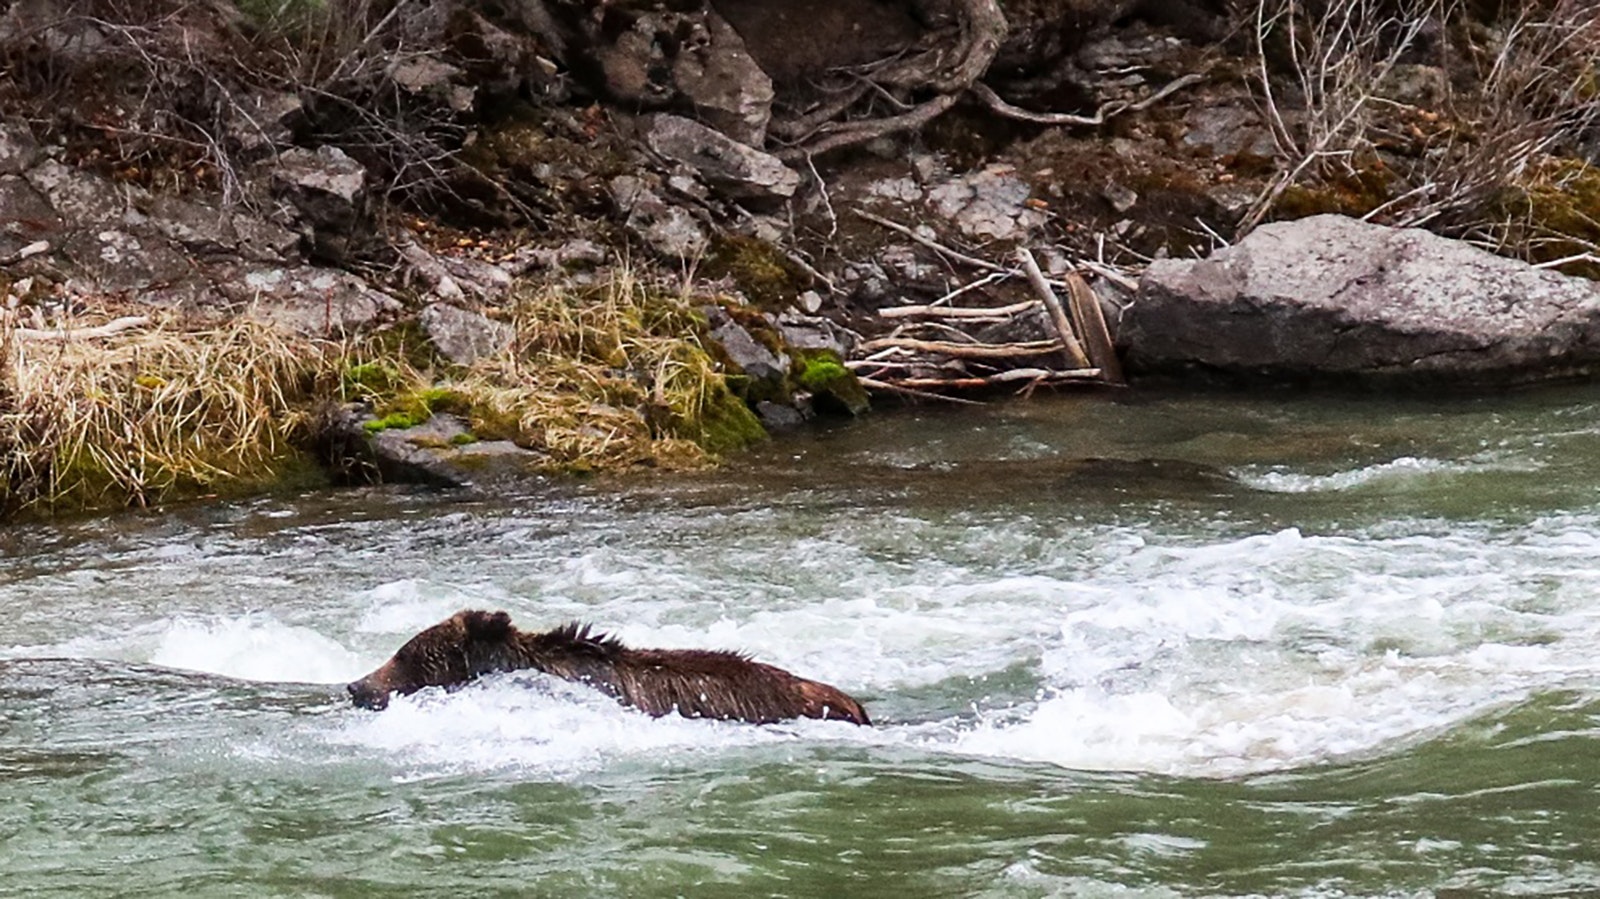 A young male grizzly powers against the current in the Hoback River near Pinedale, to get back to shore after feasting on a big game carcass in the middle of the river.